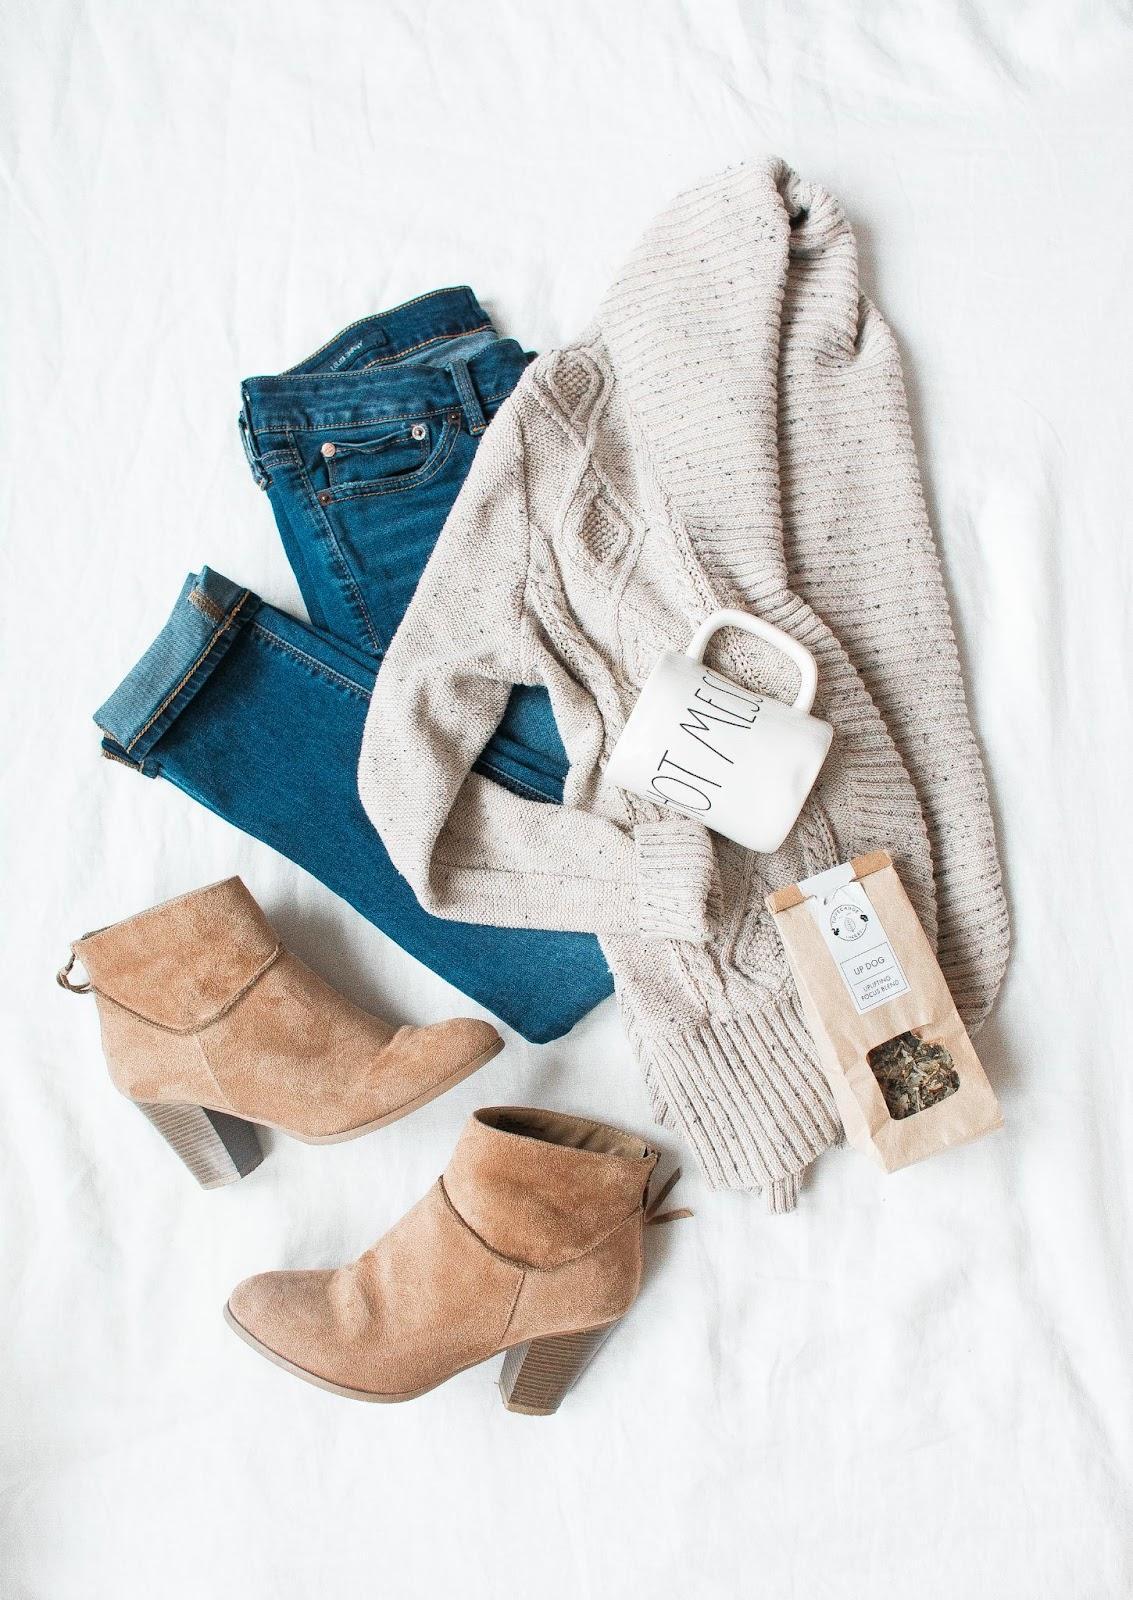 Styling tips: Timeless pieces such as blue denim jeans, coffee mug saying hot mess, bag of loose tea leaves, beige suede ankle booties, off-white long sleeve cardigan sweater